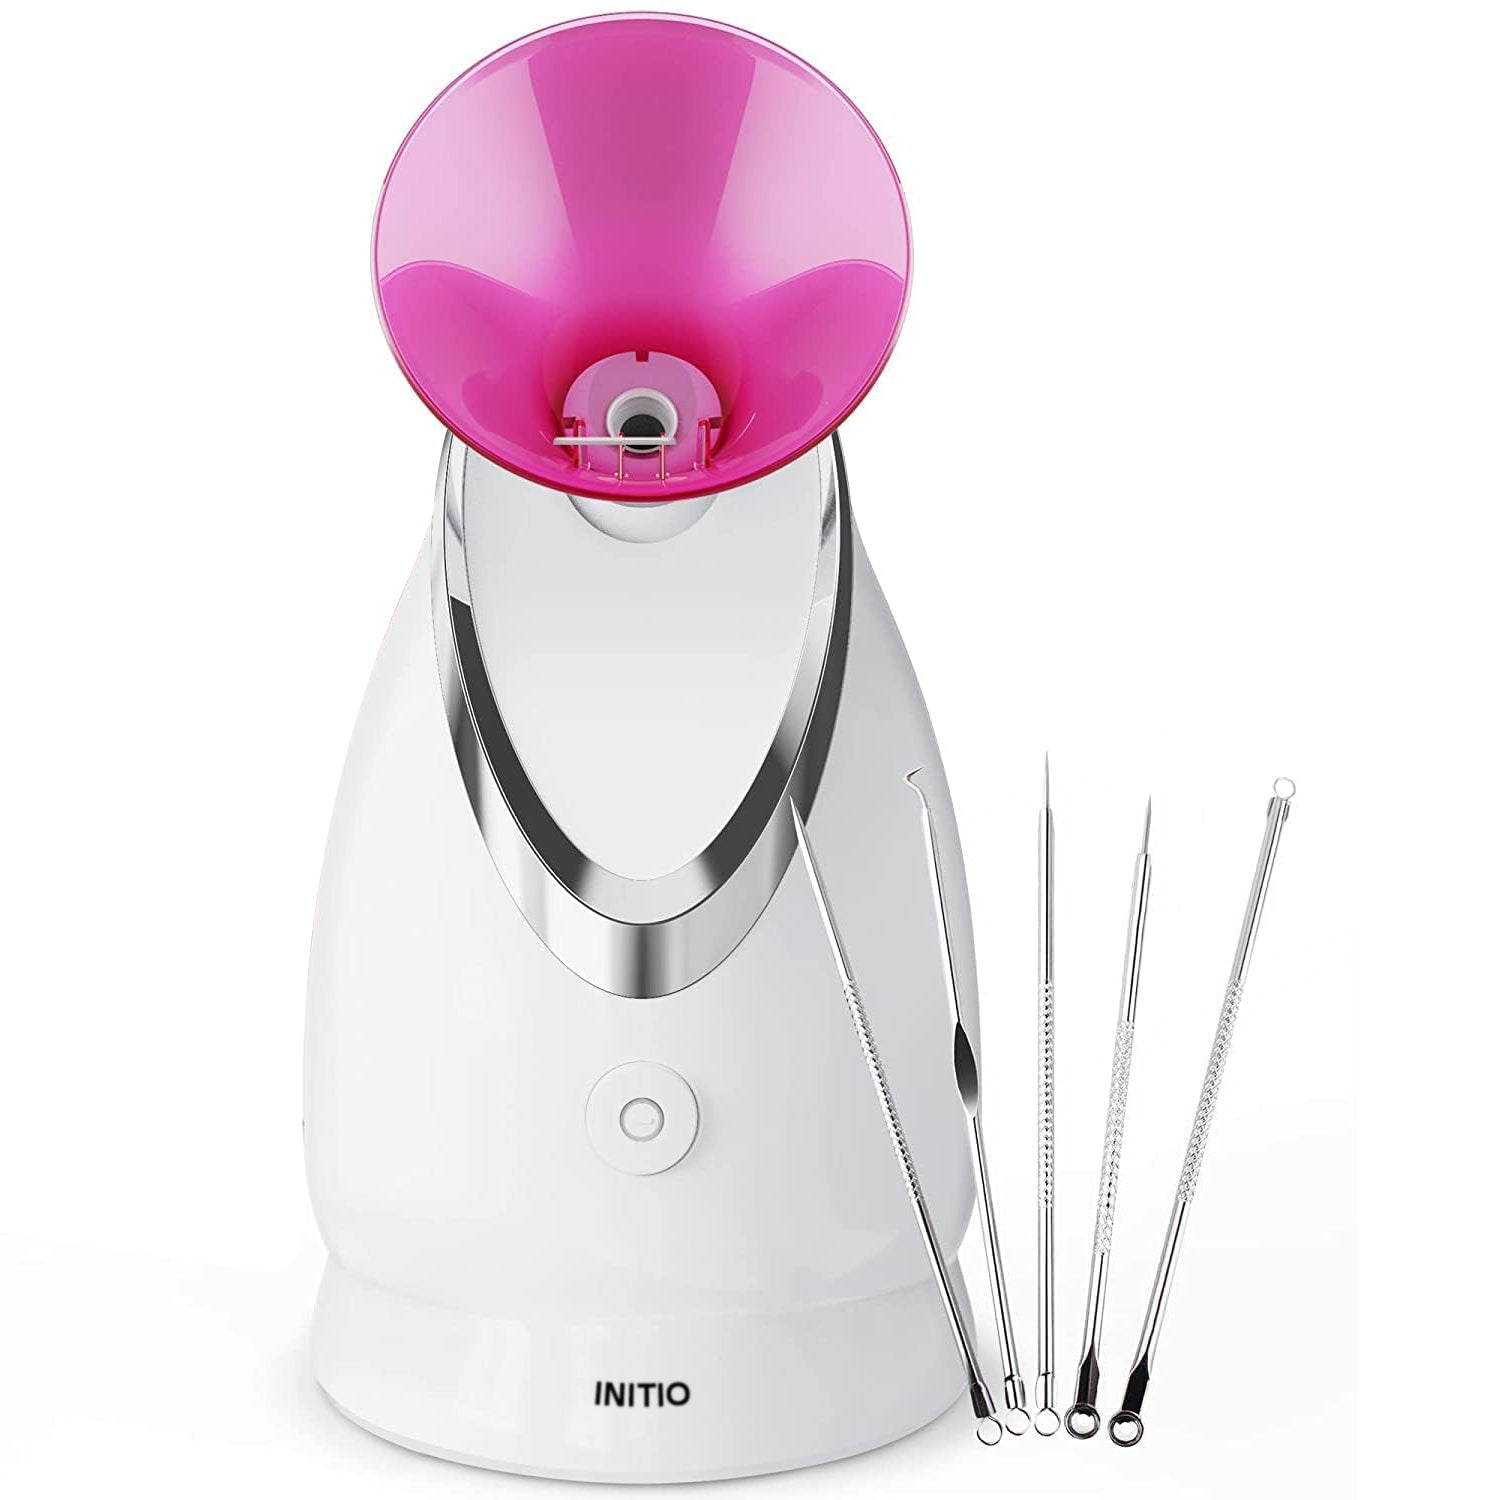 INITIO Facial Steamer Ionic Face Steamer for Home Facial, Warm Mist Humidifier Atomizer for Face Sauna Spa Sinuses Moisturizing, Unclogs Pores, with Stainless Steel Skin Kit(Pink)